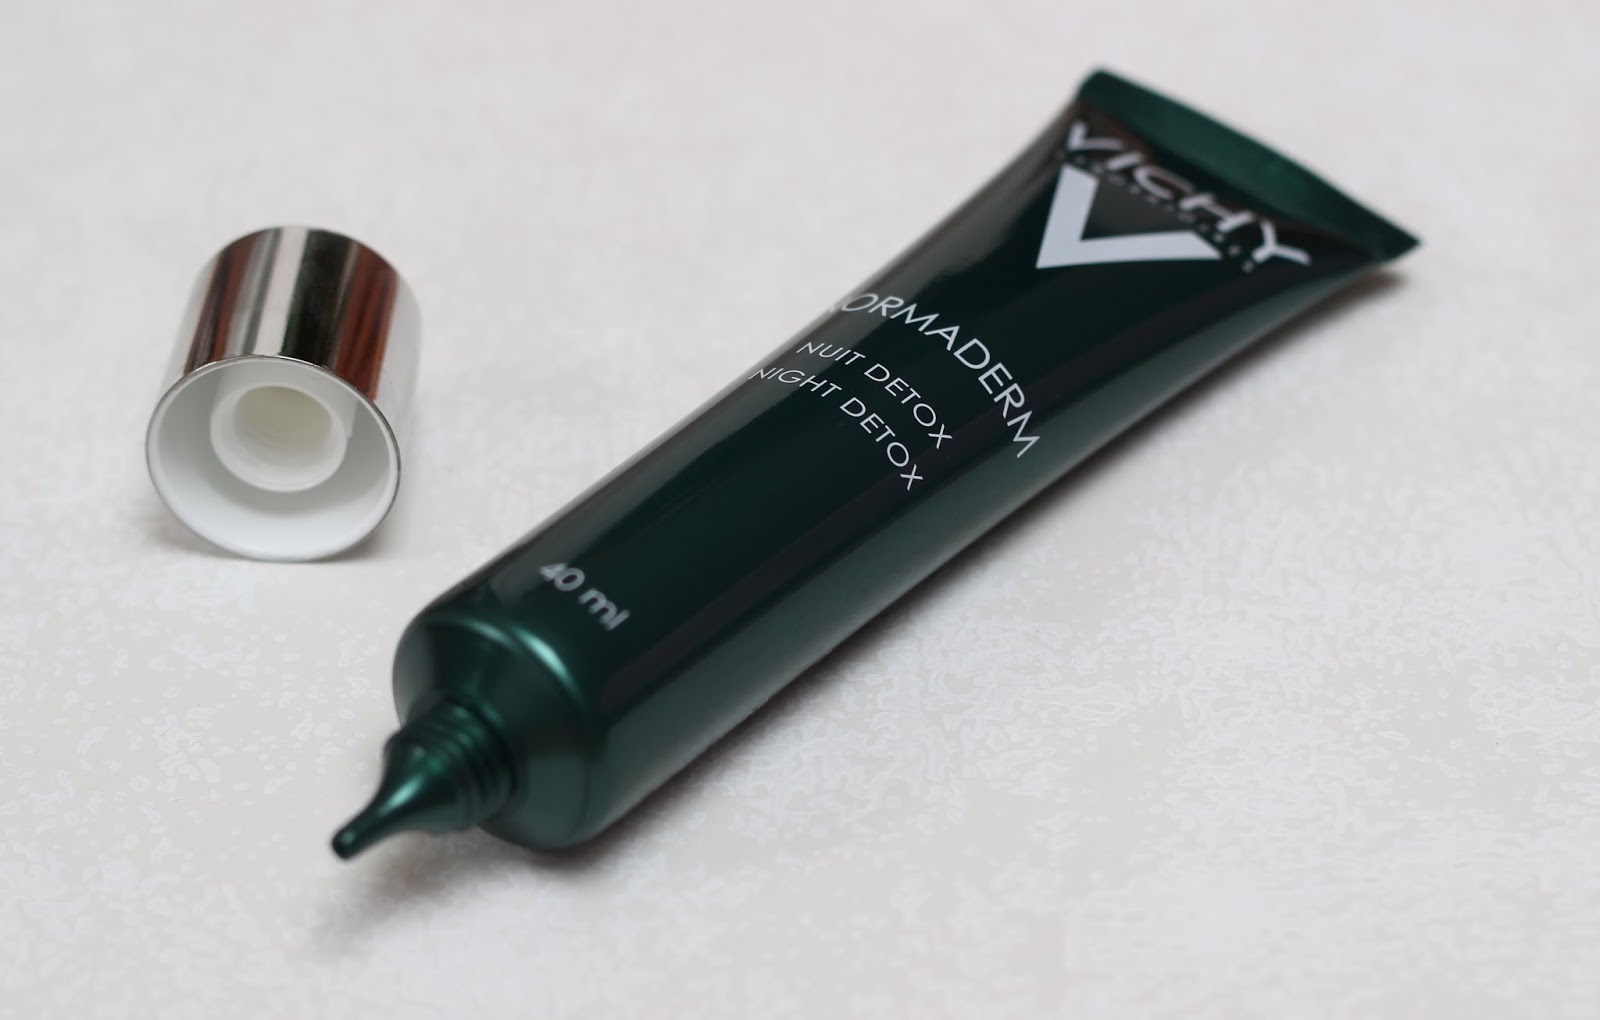 Vichy Normaderm Night Detox review